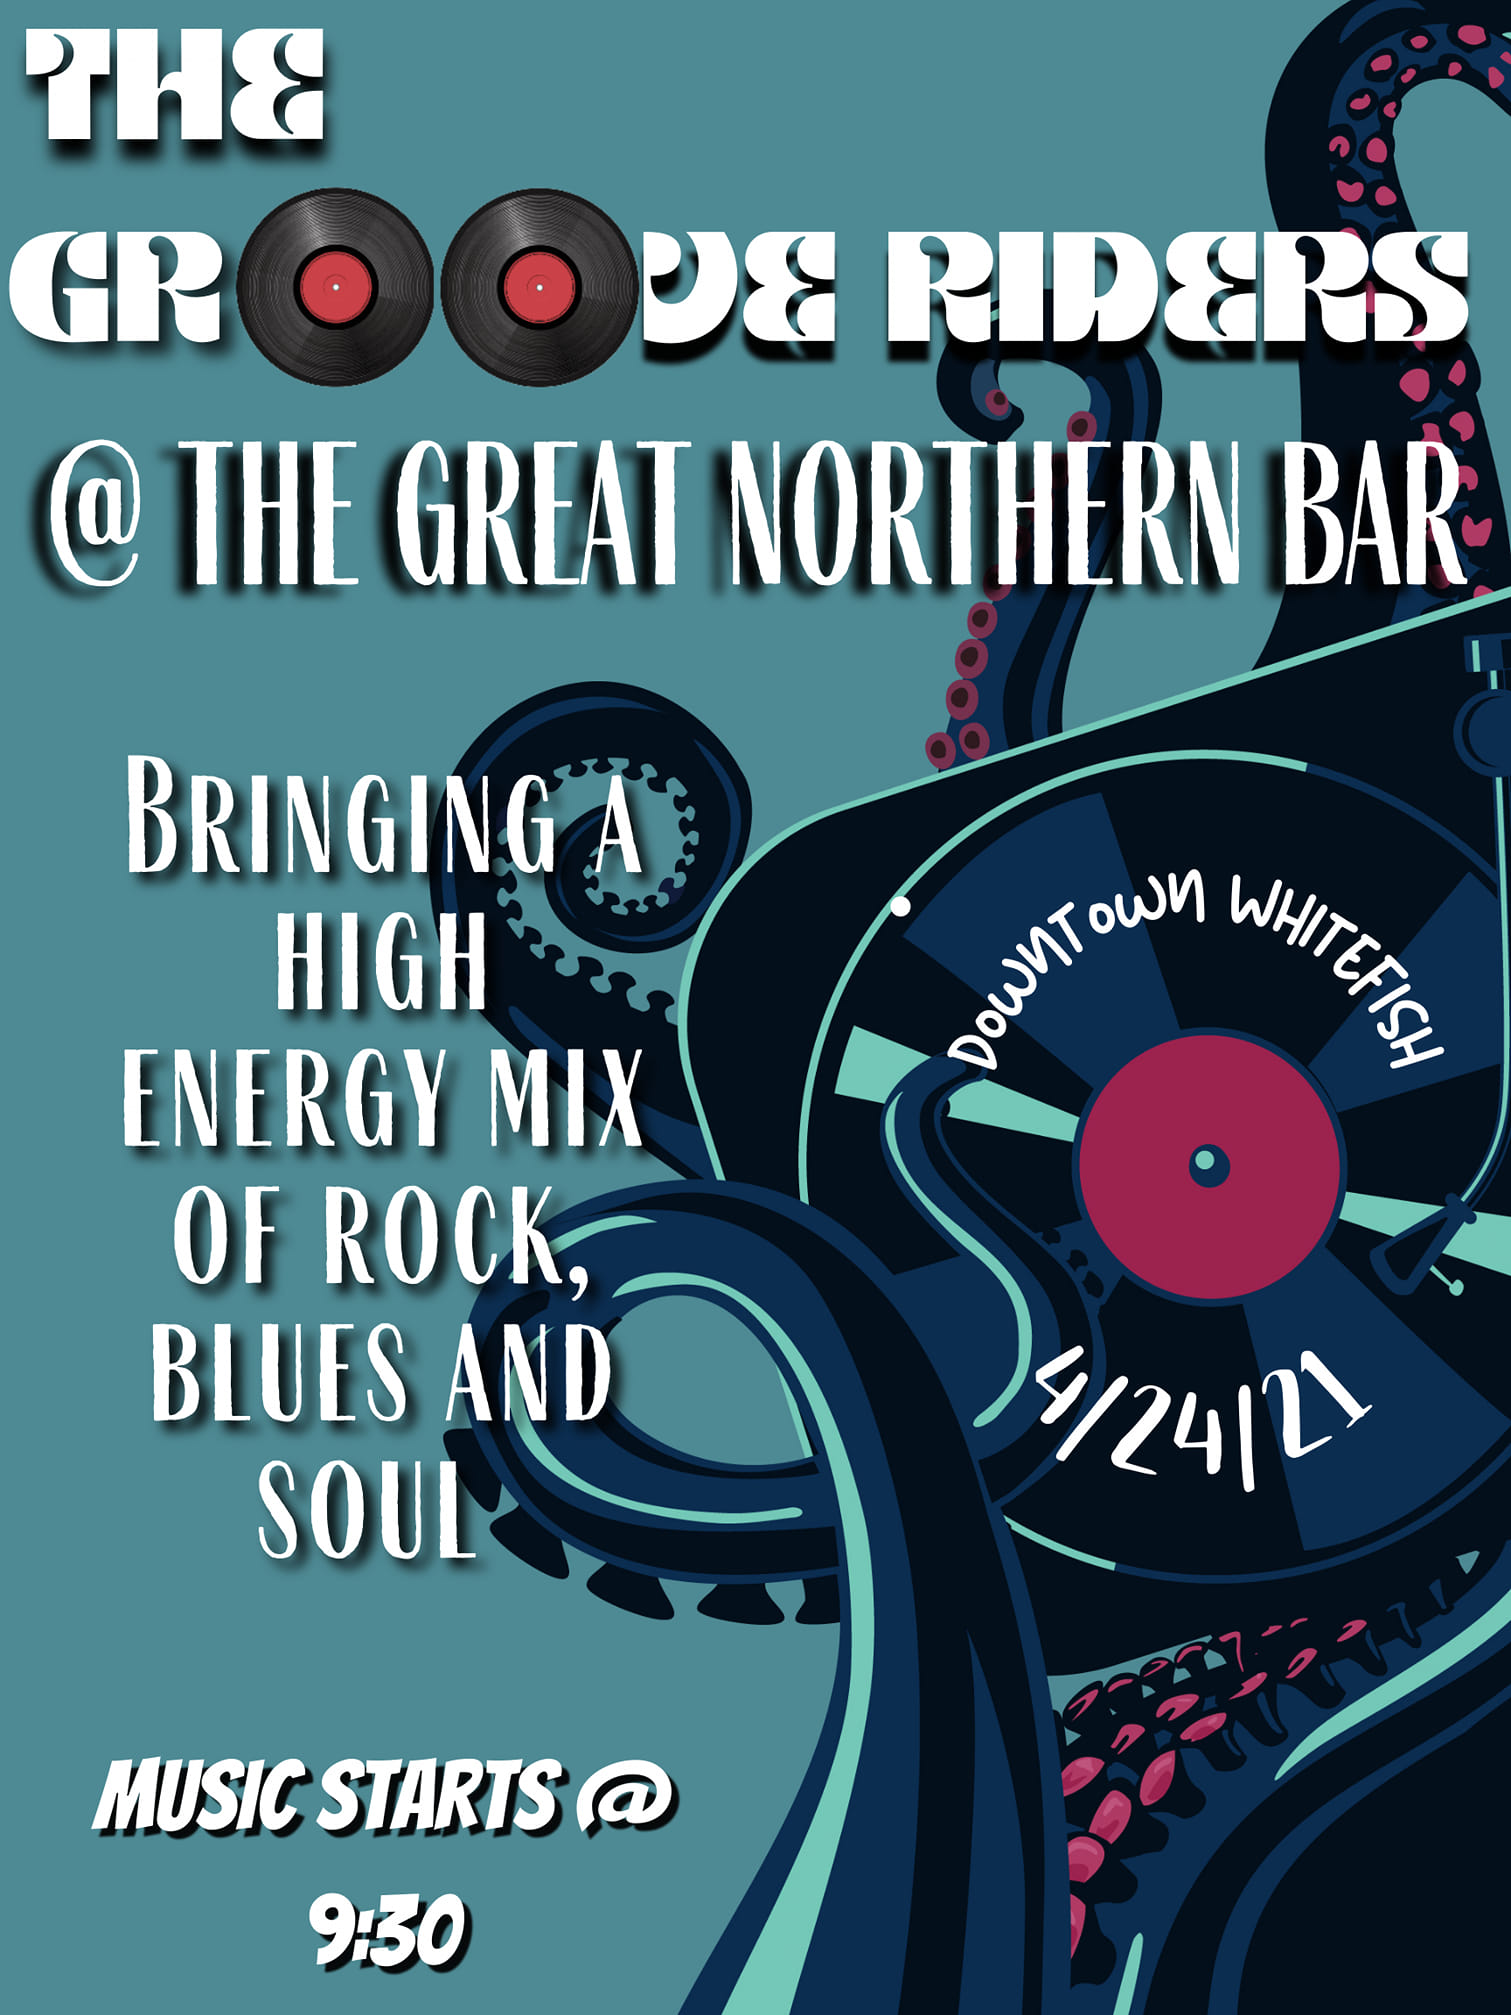 The Groove Riders @ the Great Northern Bar